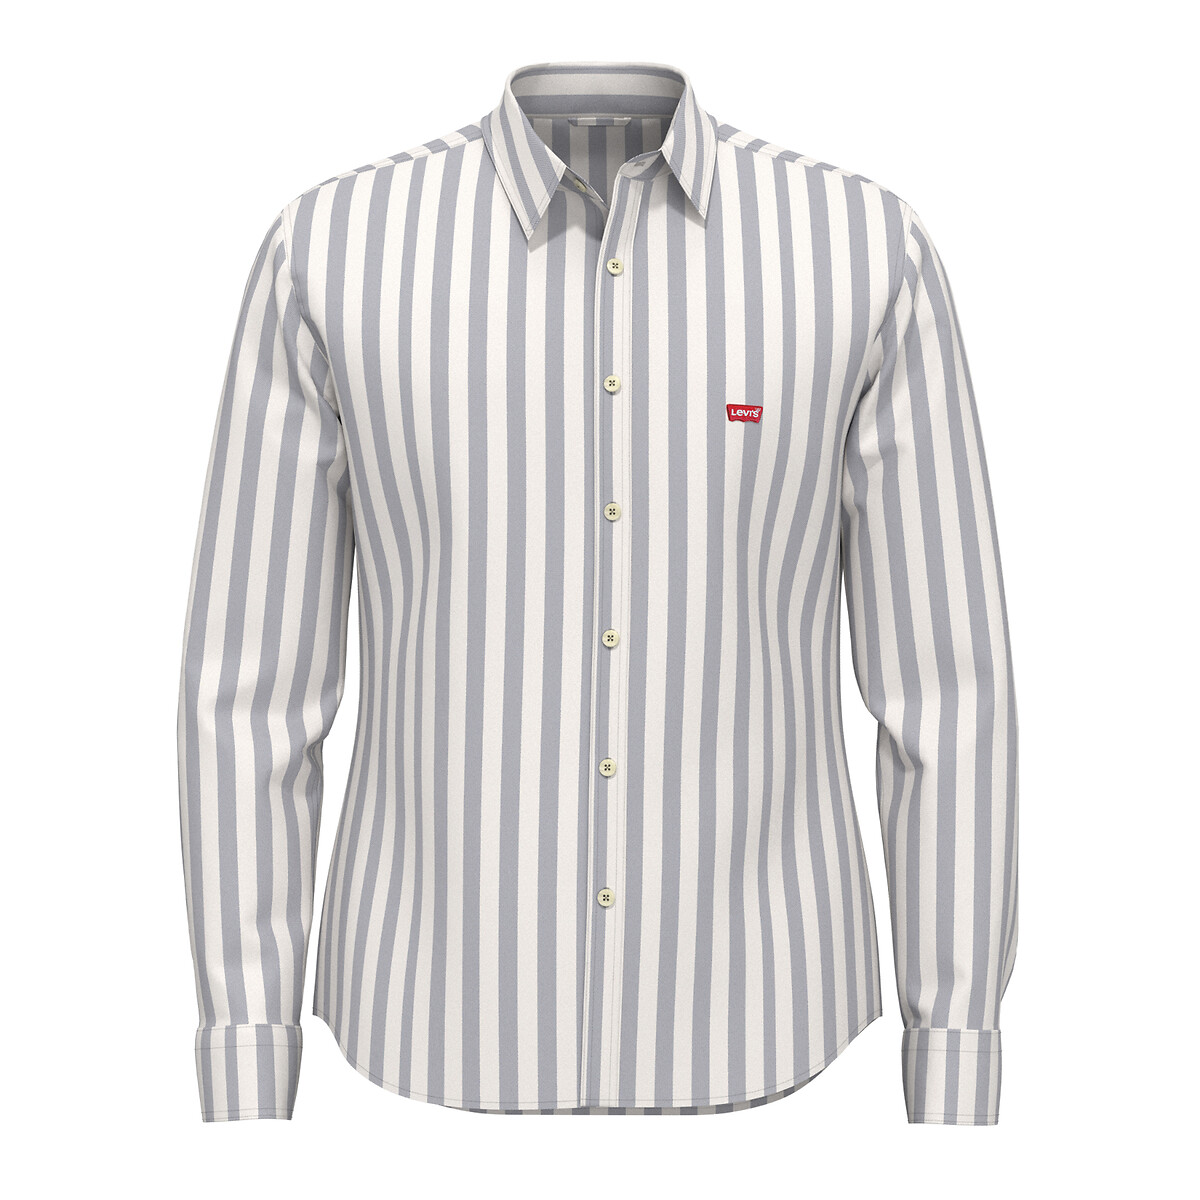 Chesthit striped shirt in cotton poplin and slim fit , white/blue, Levi's |  La Redoute